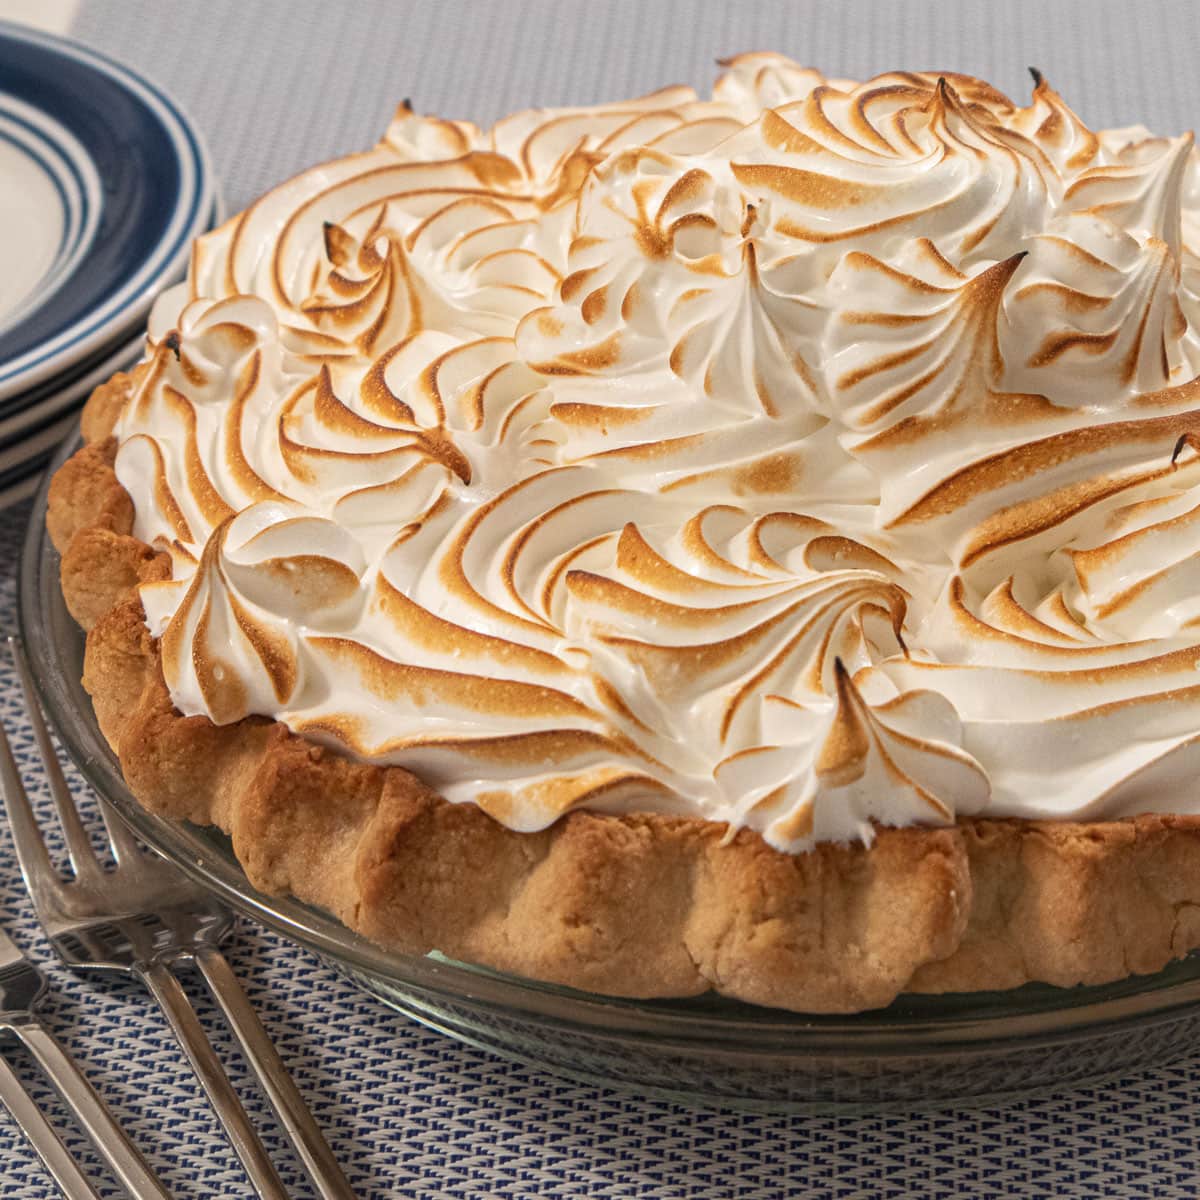 A meringue topped coconut cream pie in a glass pie pan with plates and forks beside it.